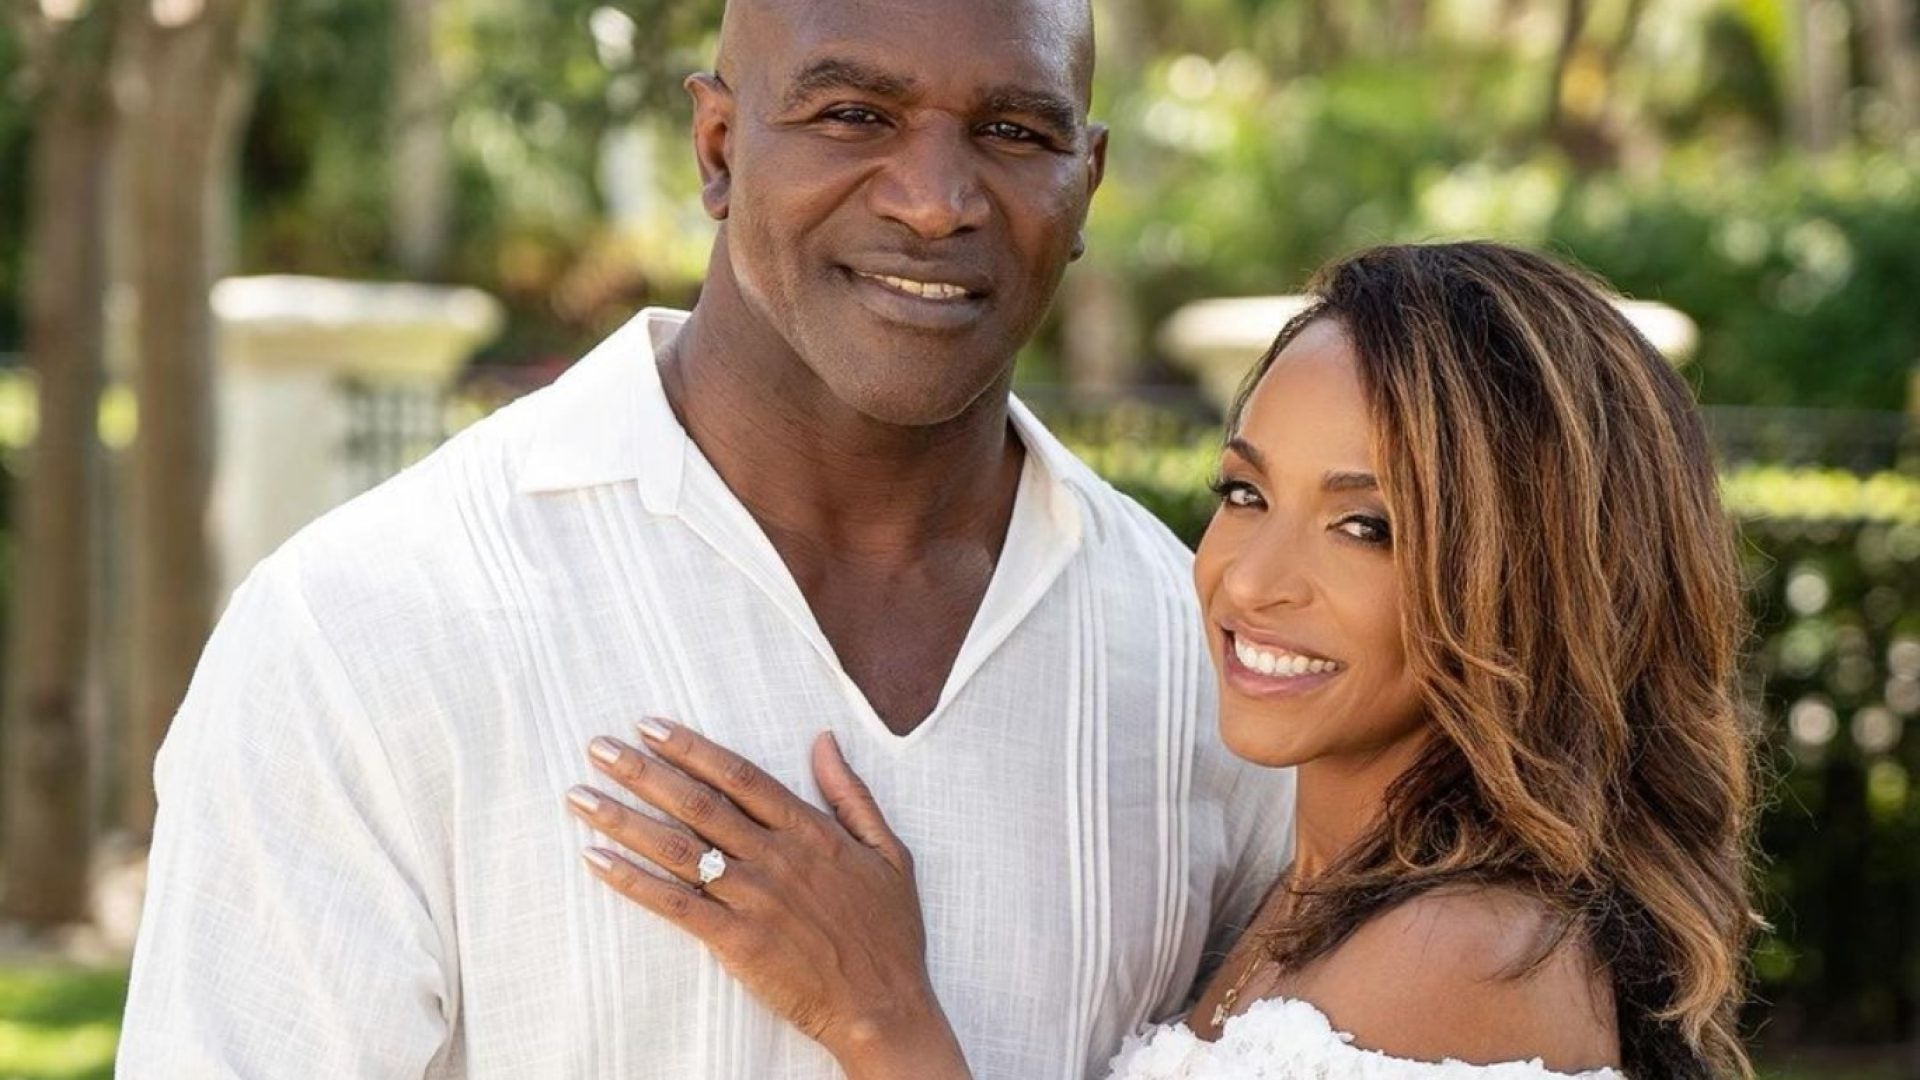 This Week In Black Love: Evander Holyfield Gets Engaged, Bey & Jay Take Venice And More